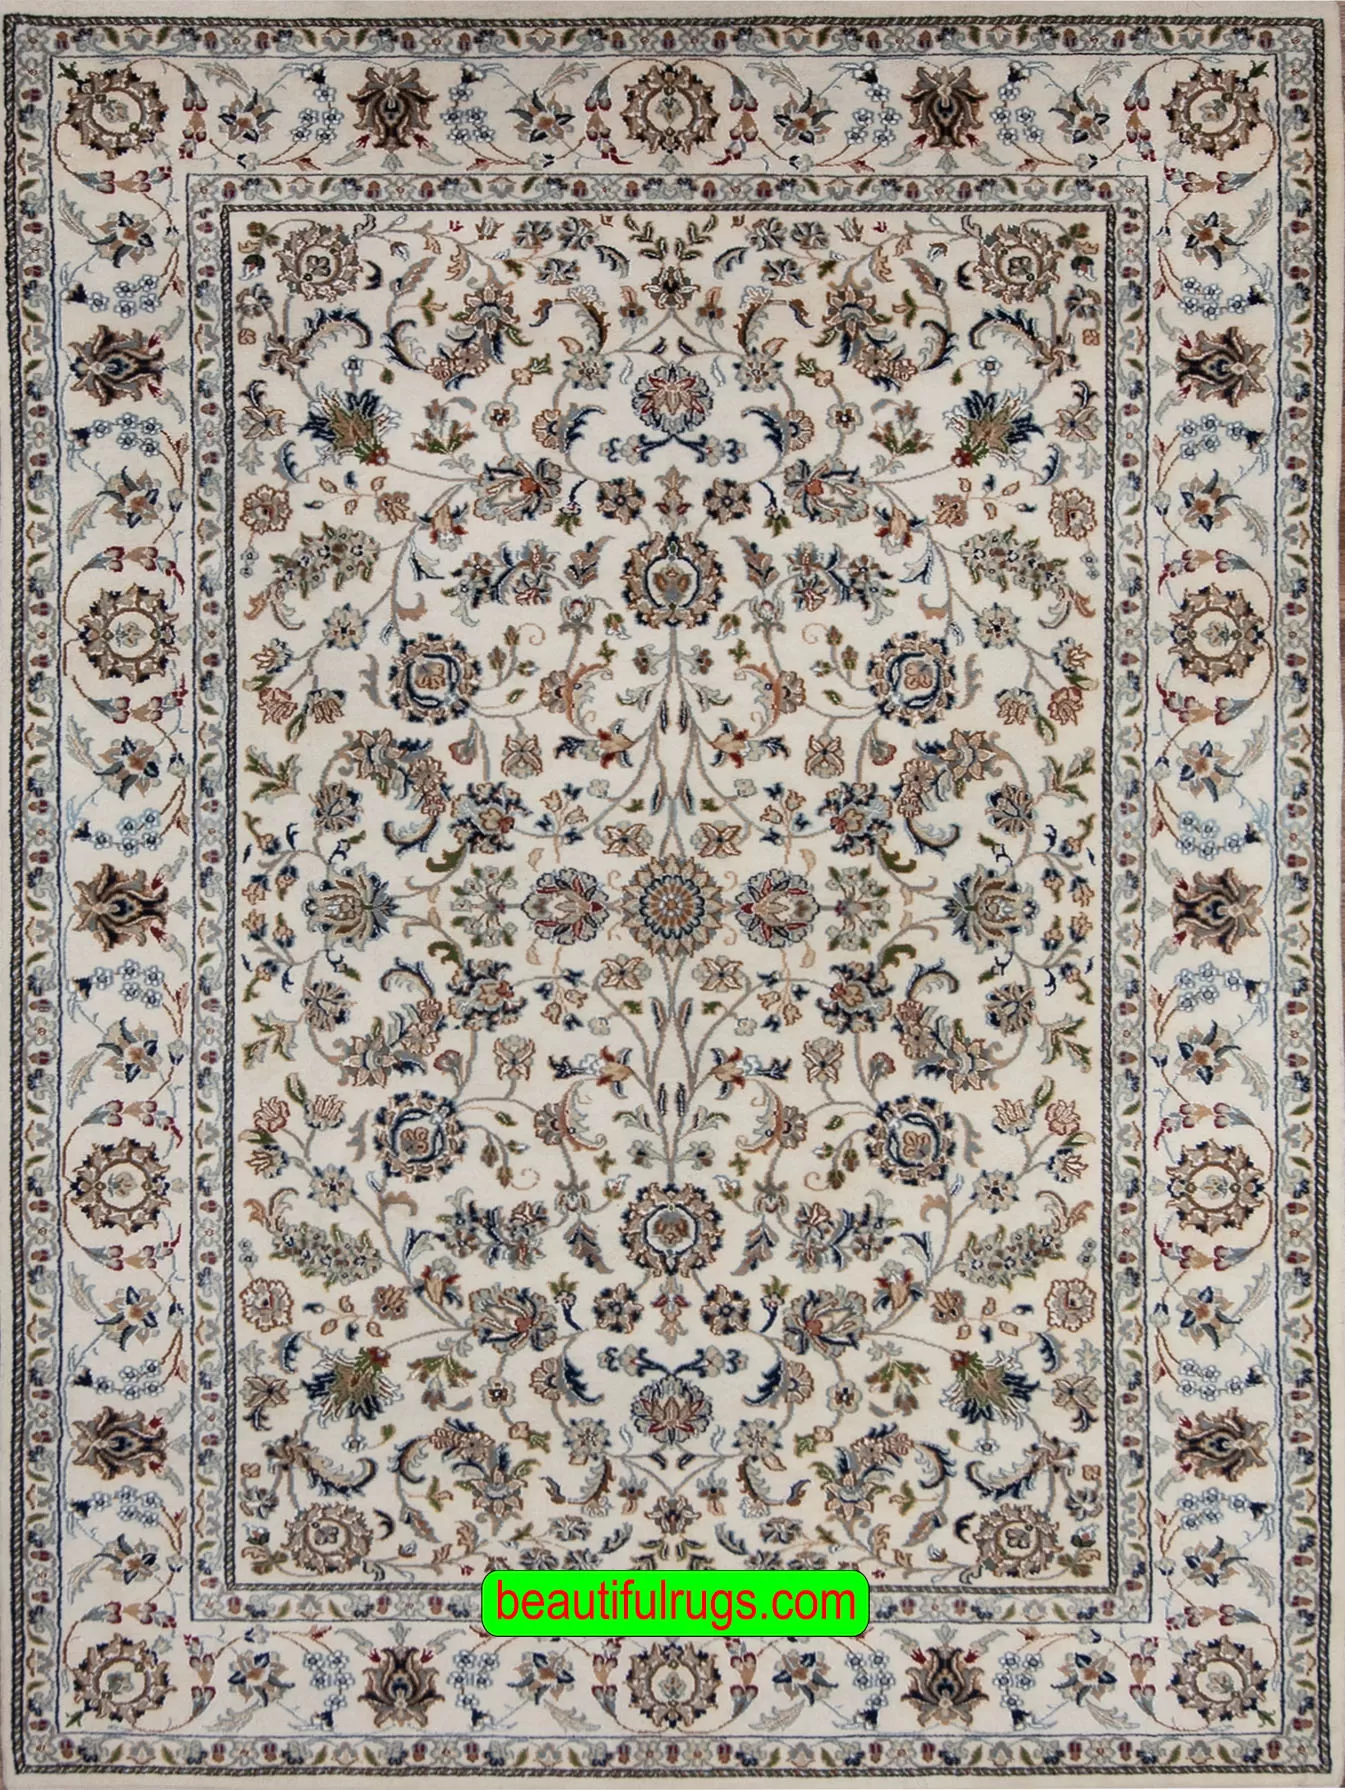 Hand knotted Oriental area rug in beige color, Nain design rug with all over patter. Size 6.1x9.3.